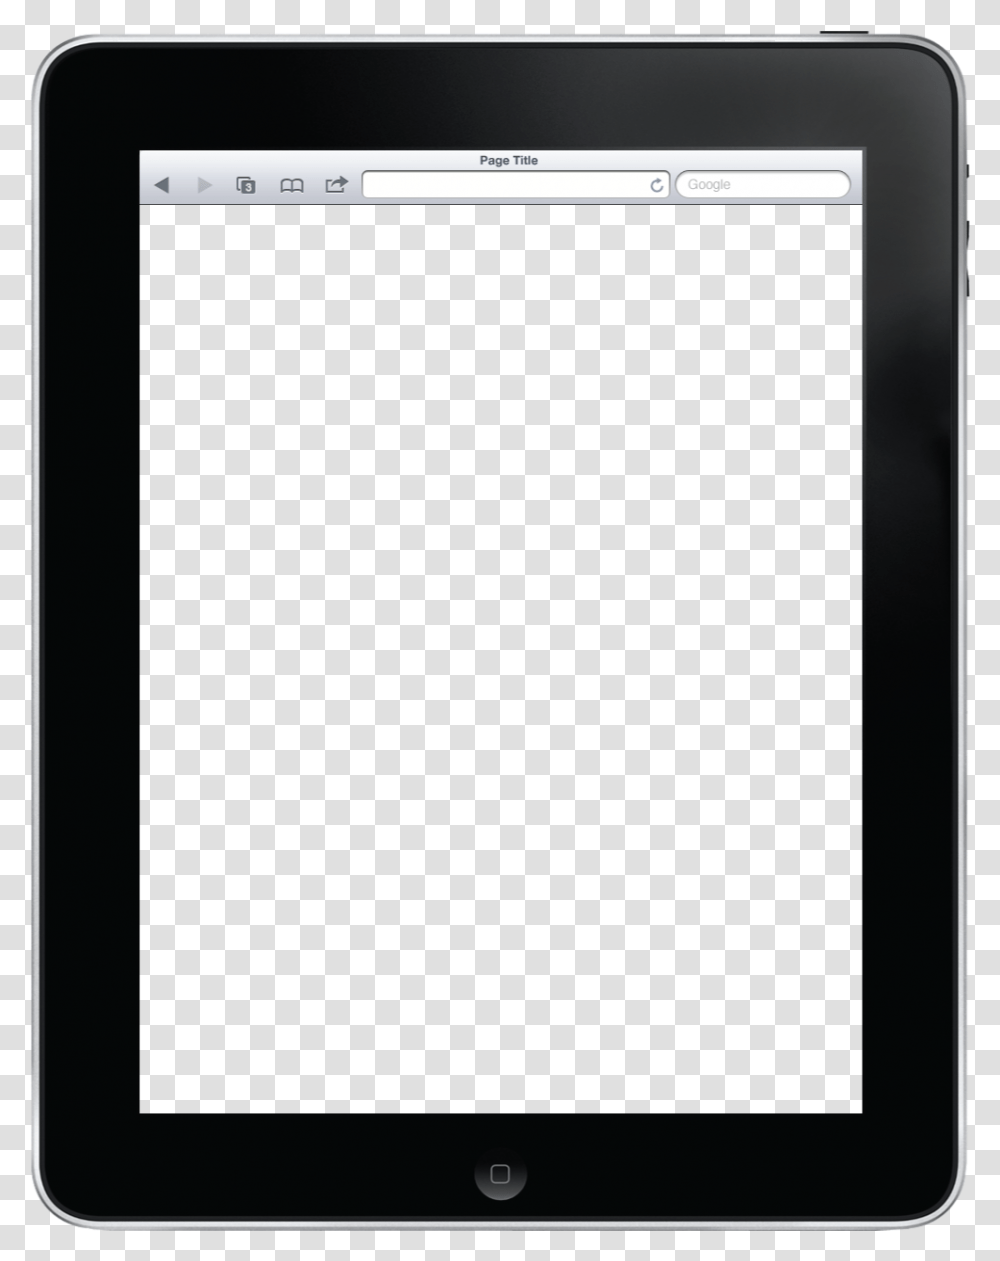 Svg Black And White Tablet Screen Demo Tablet Screen, Electronics, Computer, Mobile Phone, Cell Phone Transparent Png